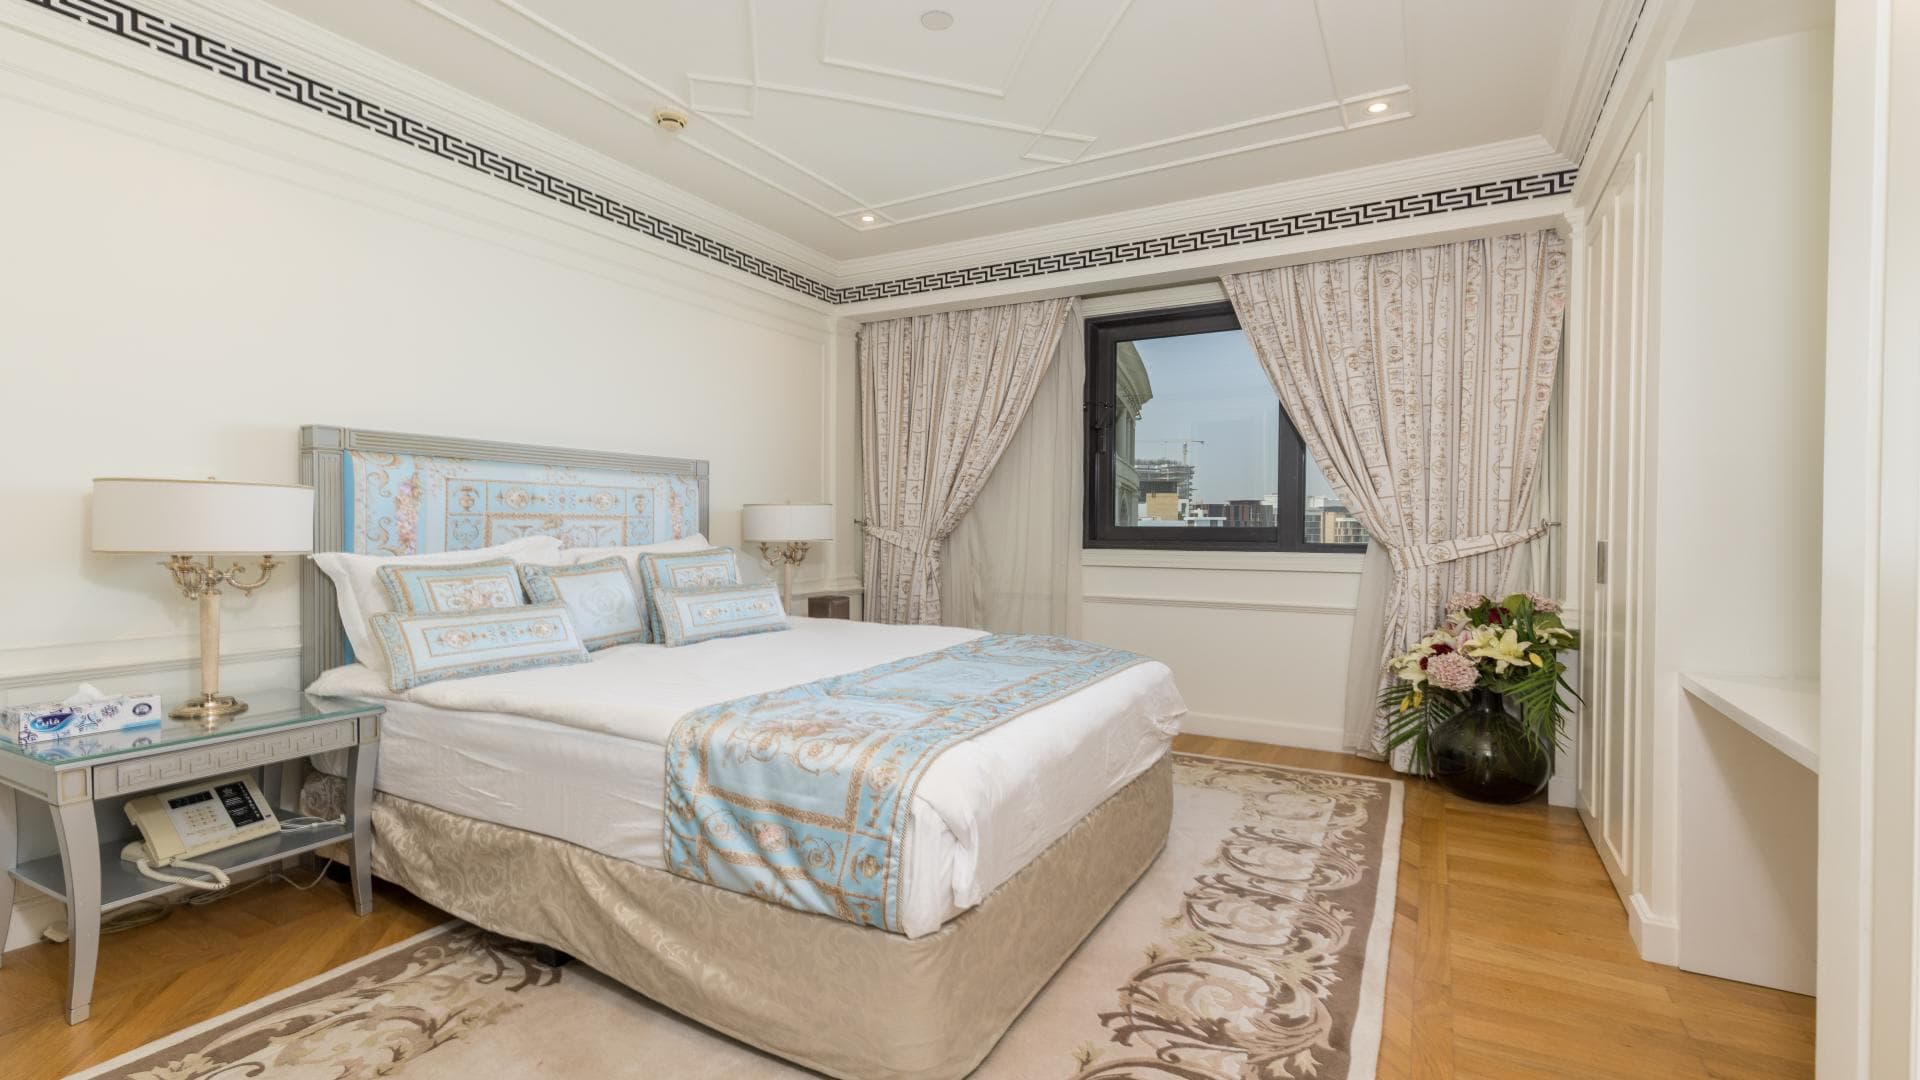 4 Bedroom Penthouse For Rent Palazzo Versace Lp14406 29a5acd2b3453c00.jpg